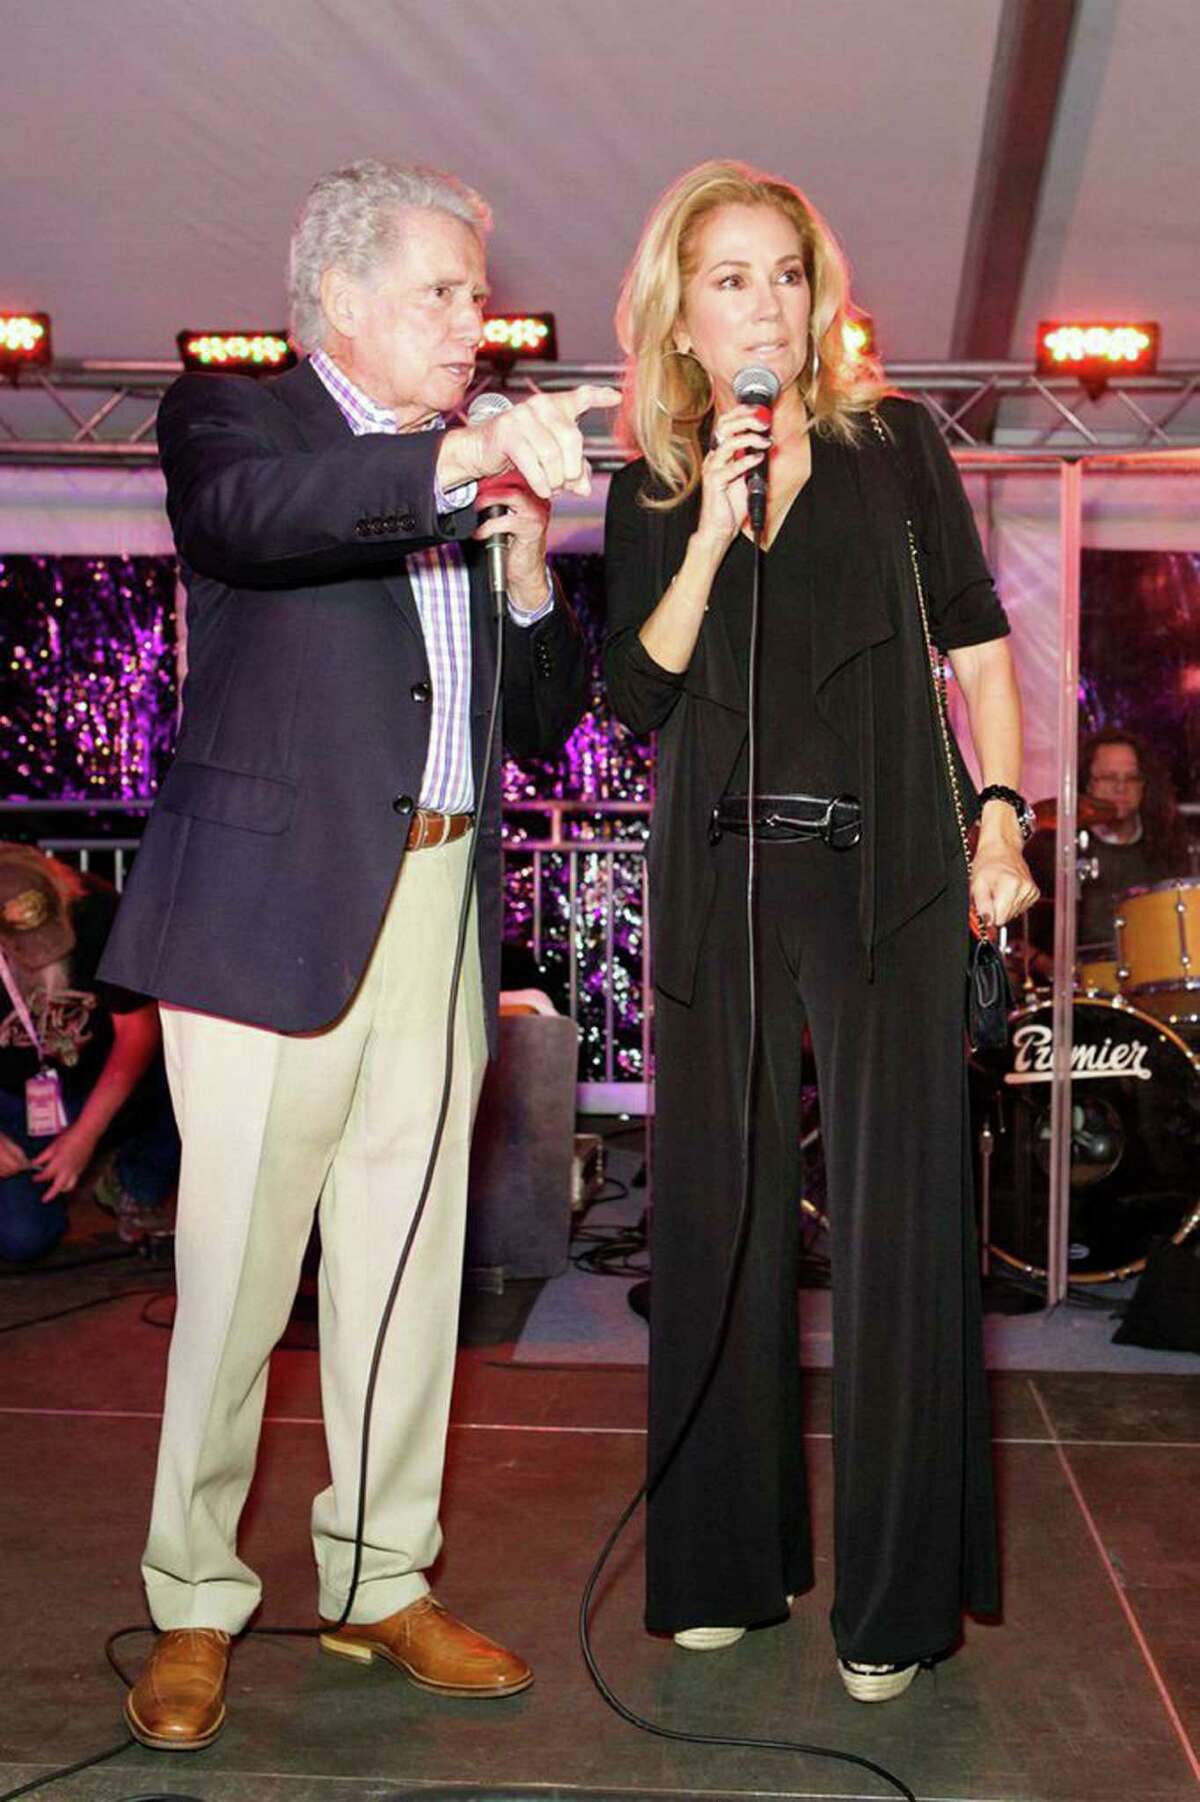 Regis Philbin and Kathie Lee Gifford were together again at the Greenwich Wine & Food Festival at Roger Sherman Baldwin Park last weekend.